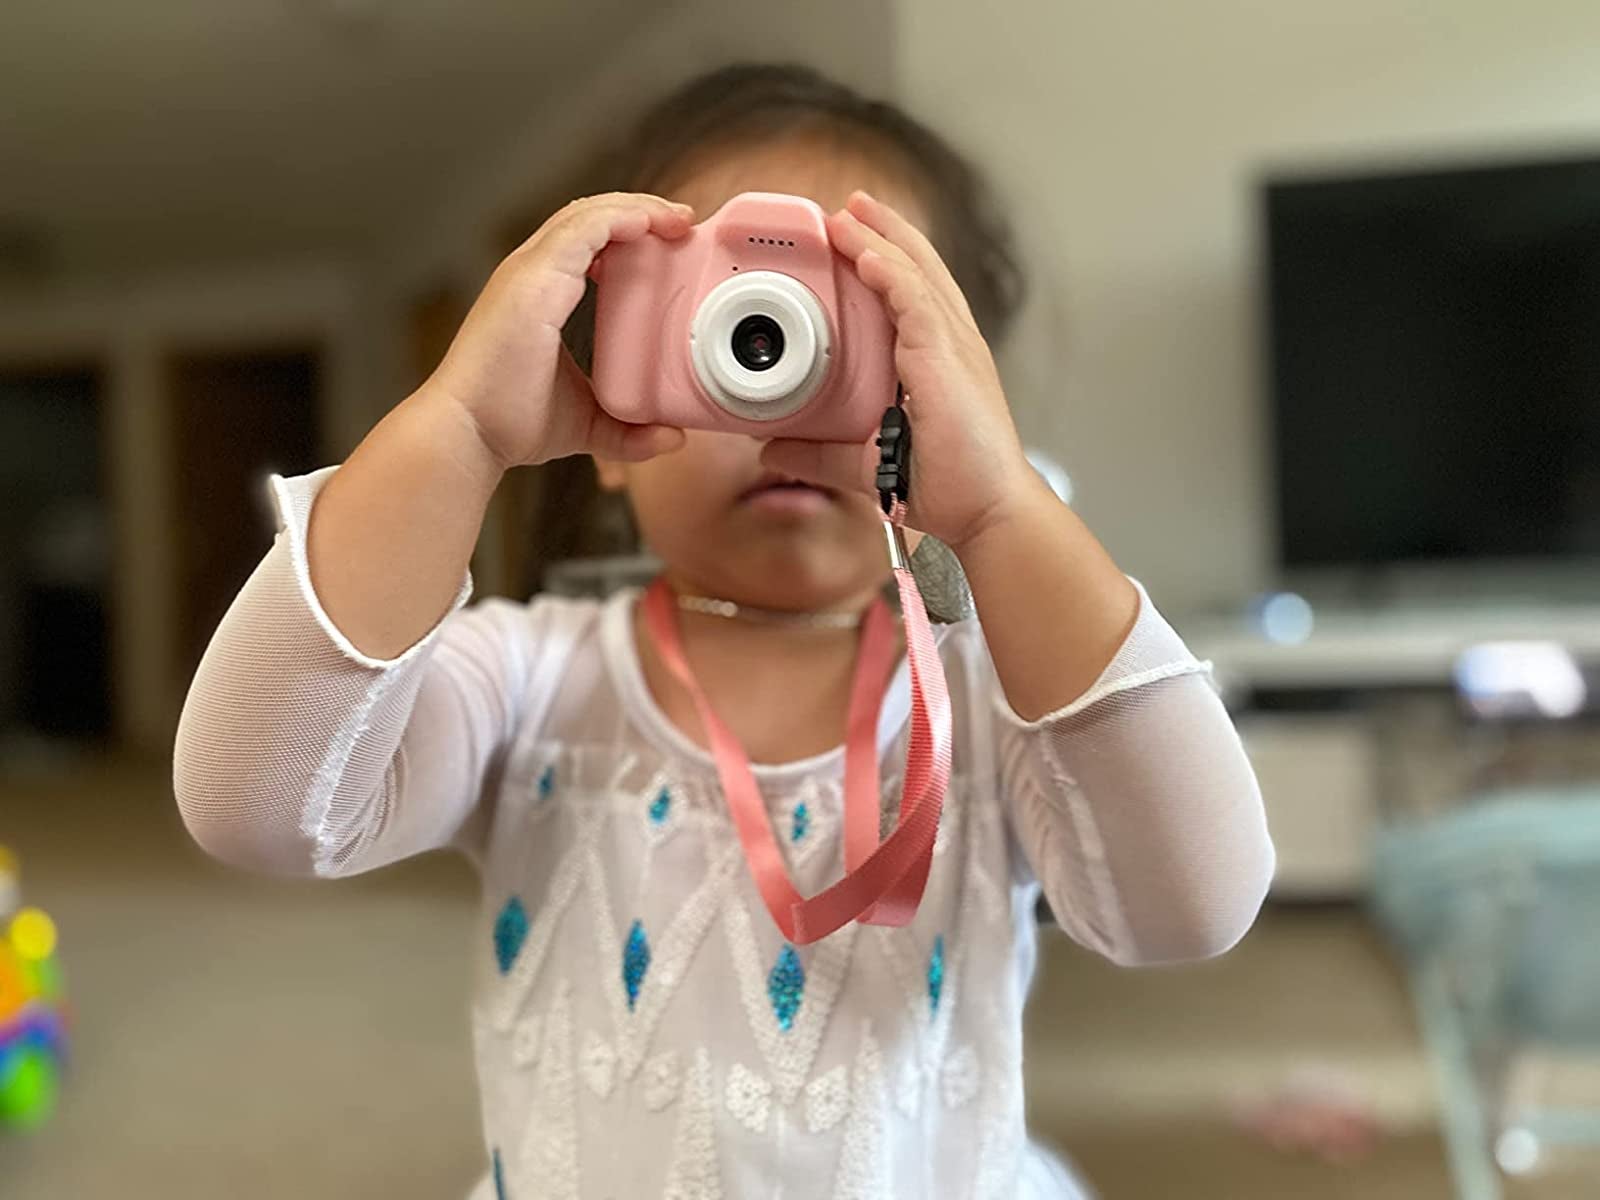 reviewer image of child holding pink camera up to their face